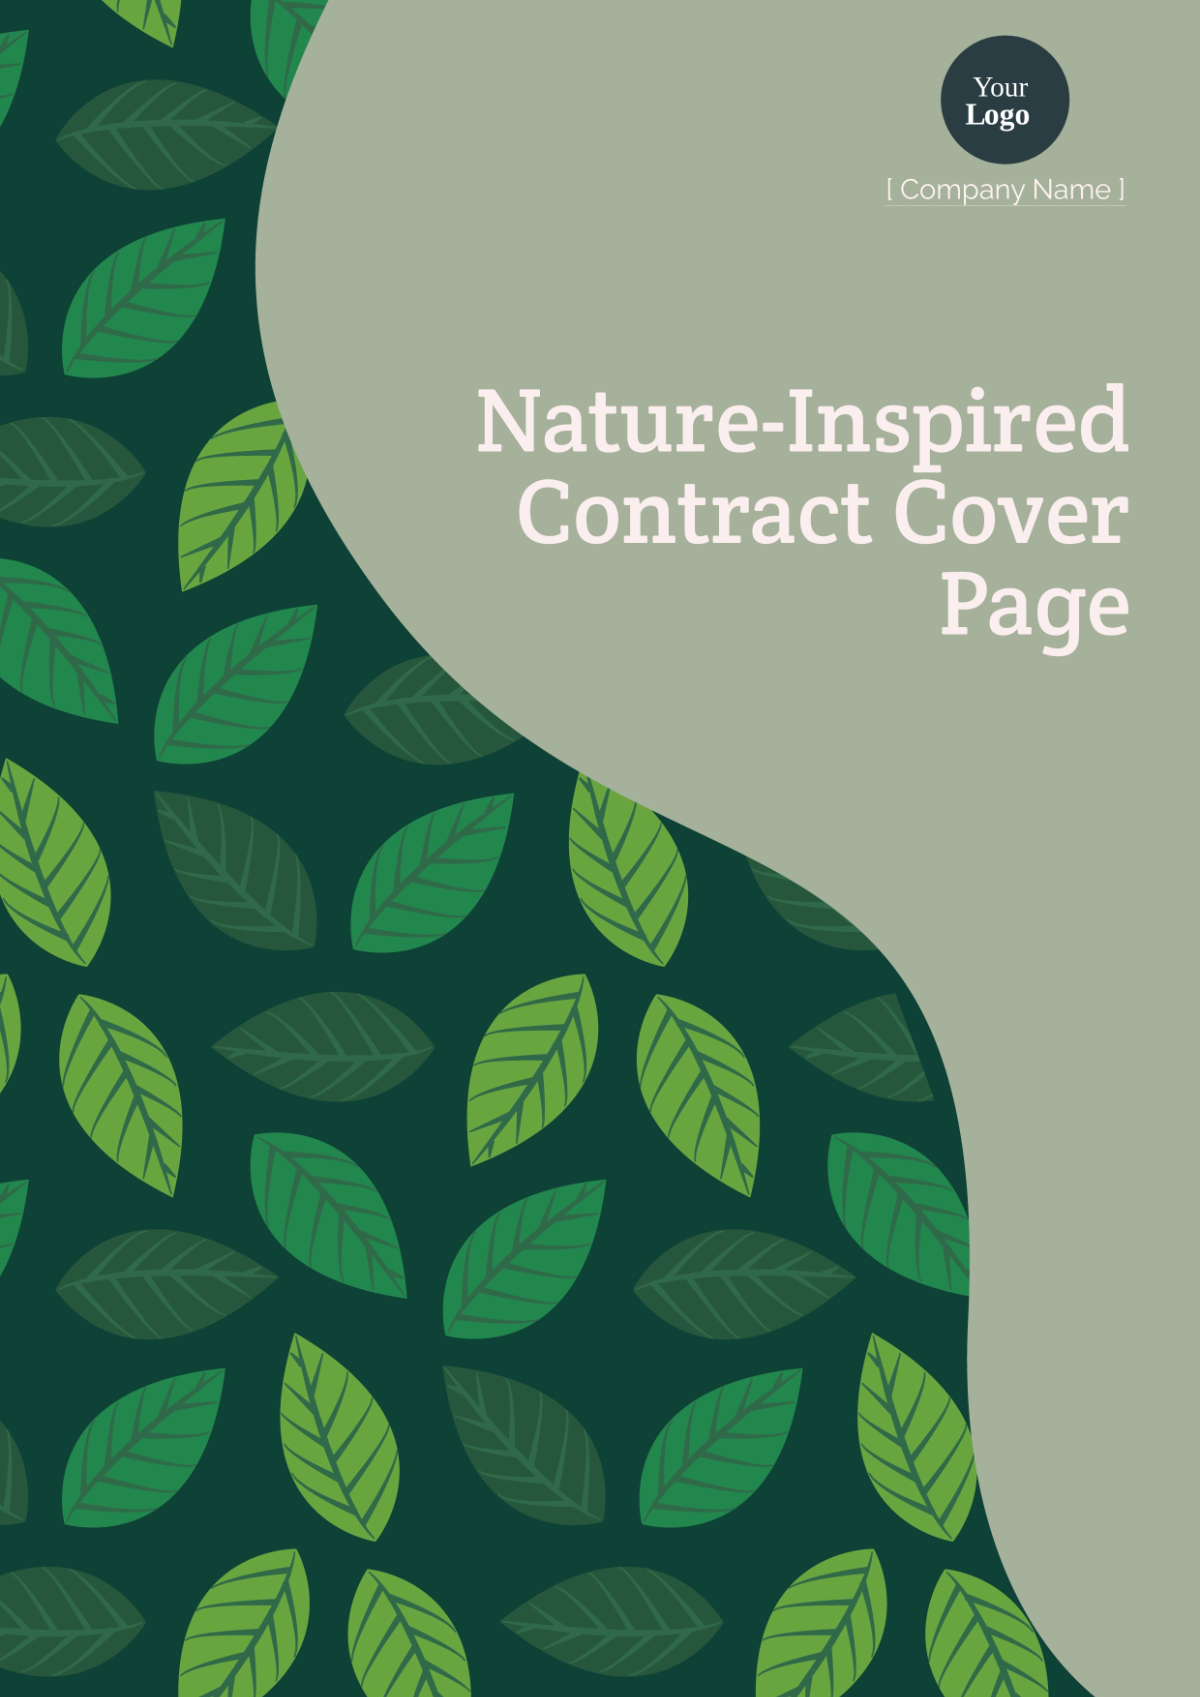 Nature-Inspired Contract Cover Page Template